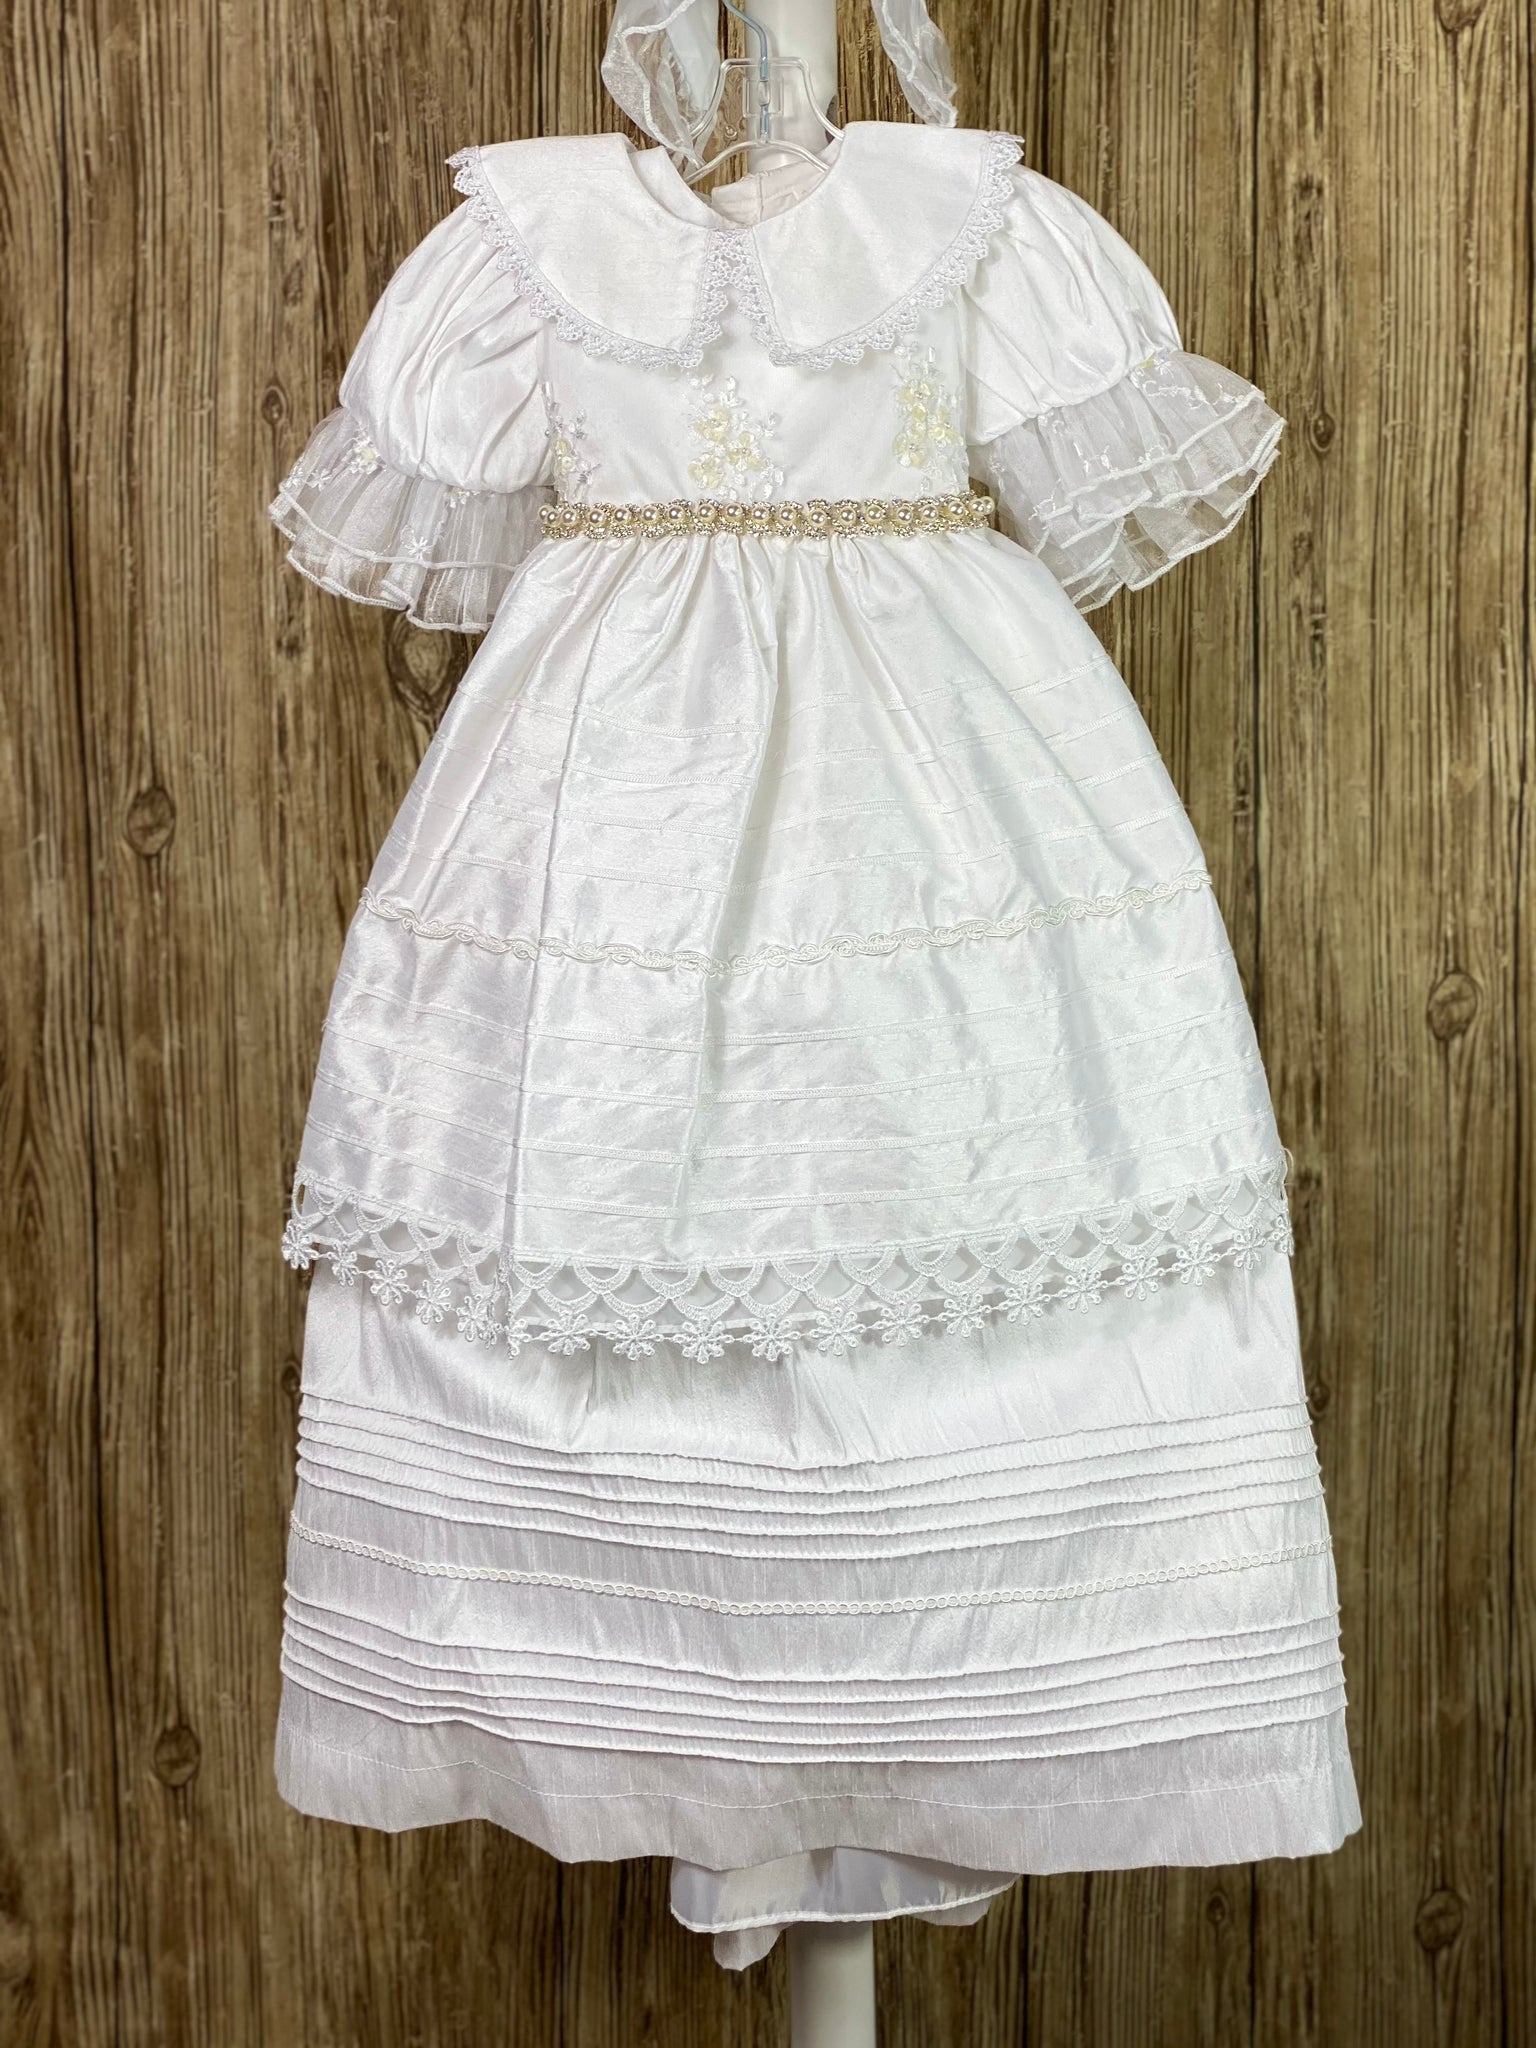 This a beautiful, one-of-a-kind baptism gown.  A lovely gown for a precious child.  White, size 12M Two layer dress Satin bodice with lace overlay Satin collar with lace trim Rhinestone pearl belting Puffed satin sleeves with lace trim Horizonal pinstripes with lace trim Second layer has horizonal pinstripes with lace trim  Satin bow in back Satin bonnet with ruffled lace brim